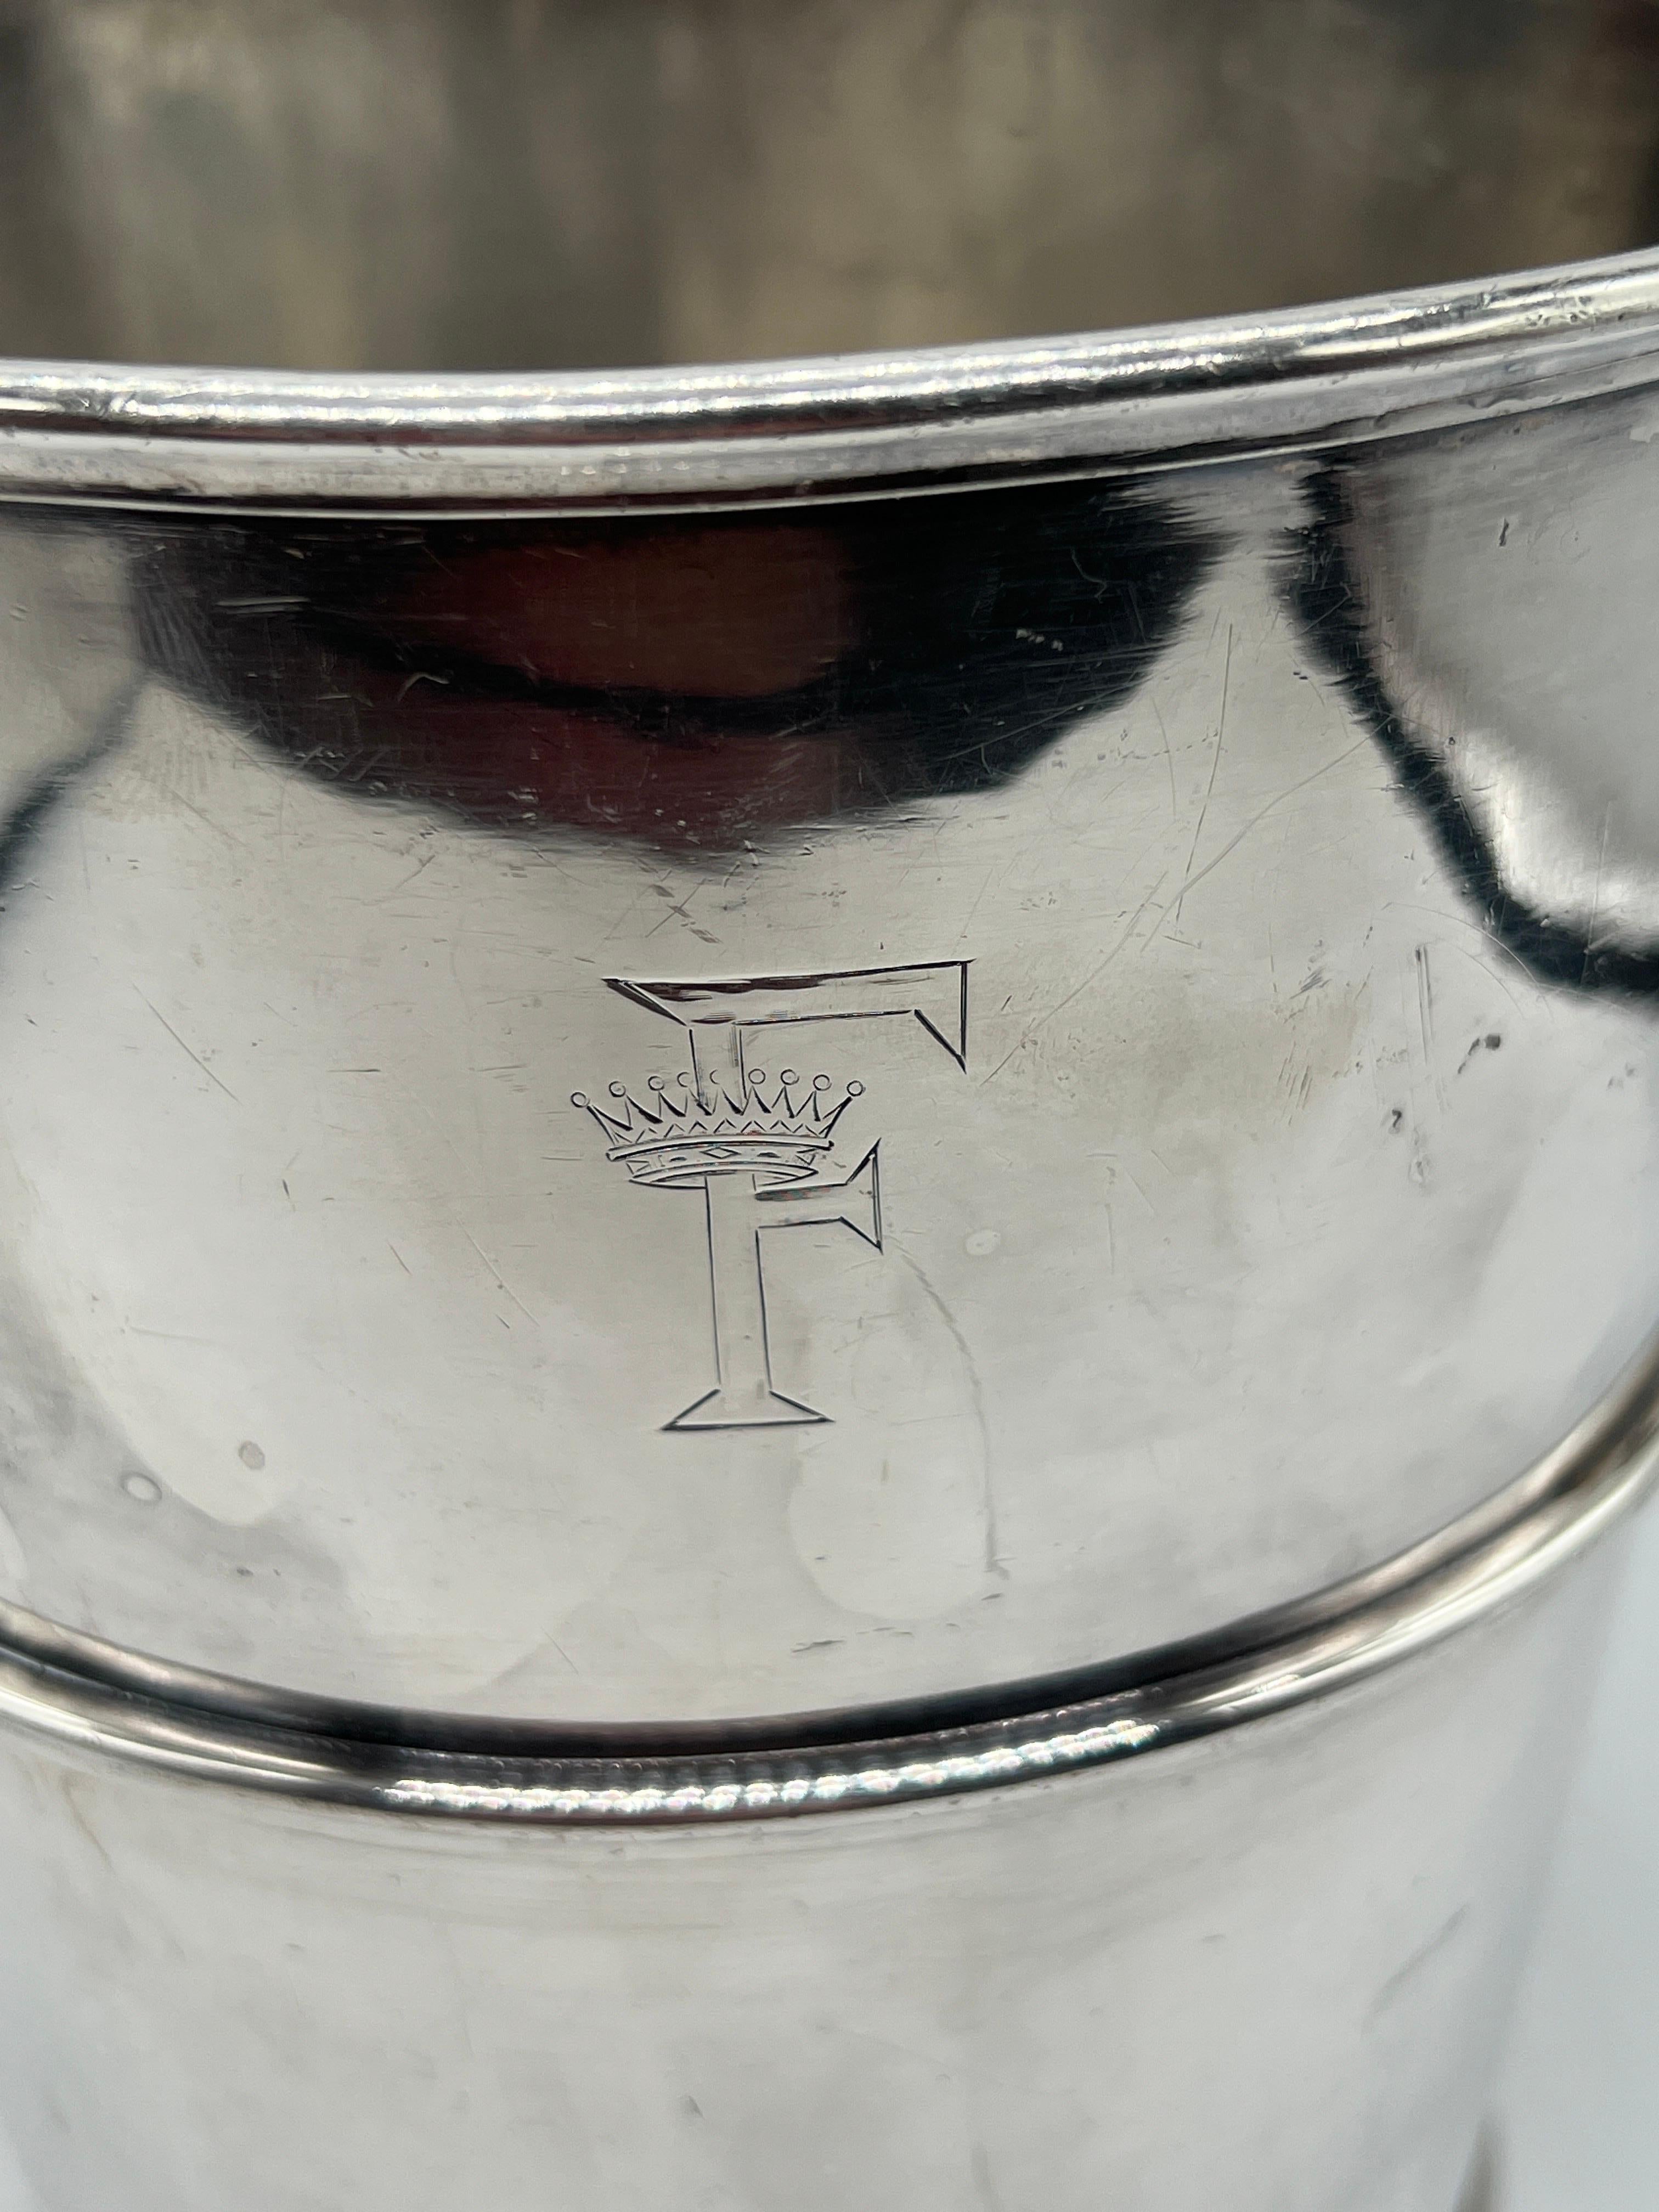 Elkington & Co., (English, founded 1815), circa 1886.

An antique silverplated ice, wine or champagne bucket with accent header and mid lines, an 